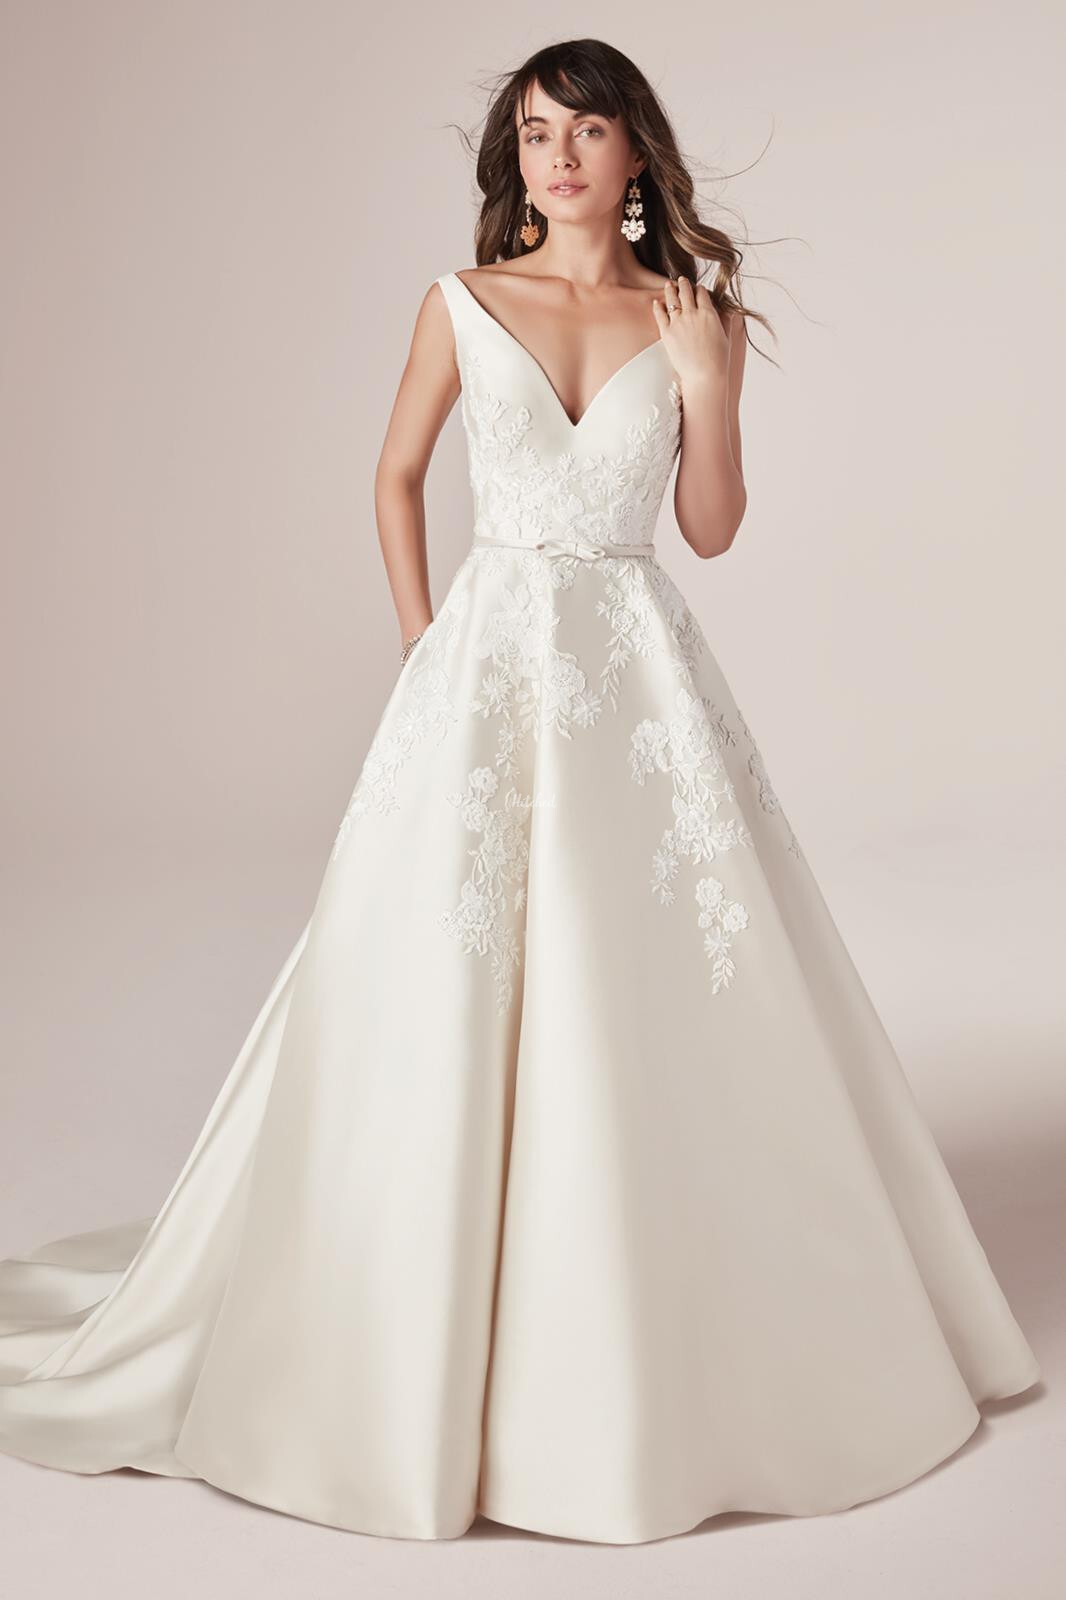 Best Valerie Wedding Dress of all time Learn more here 